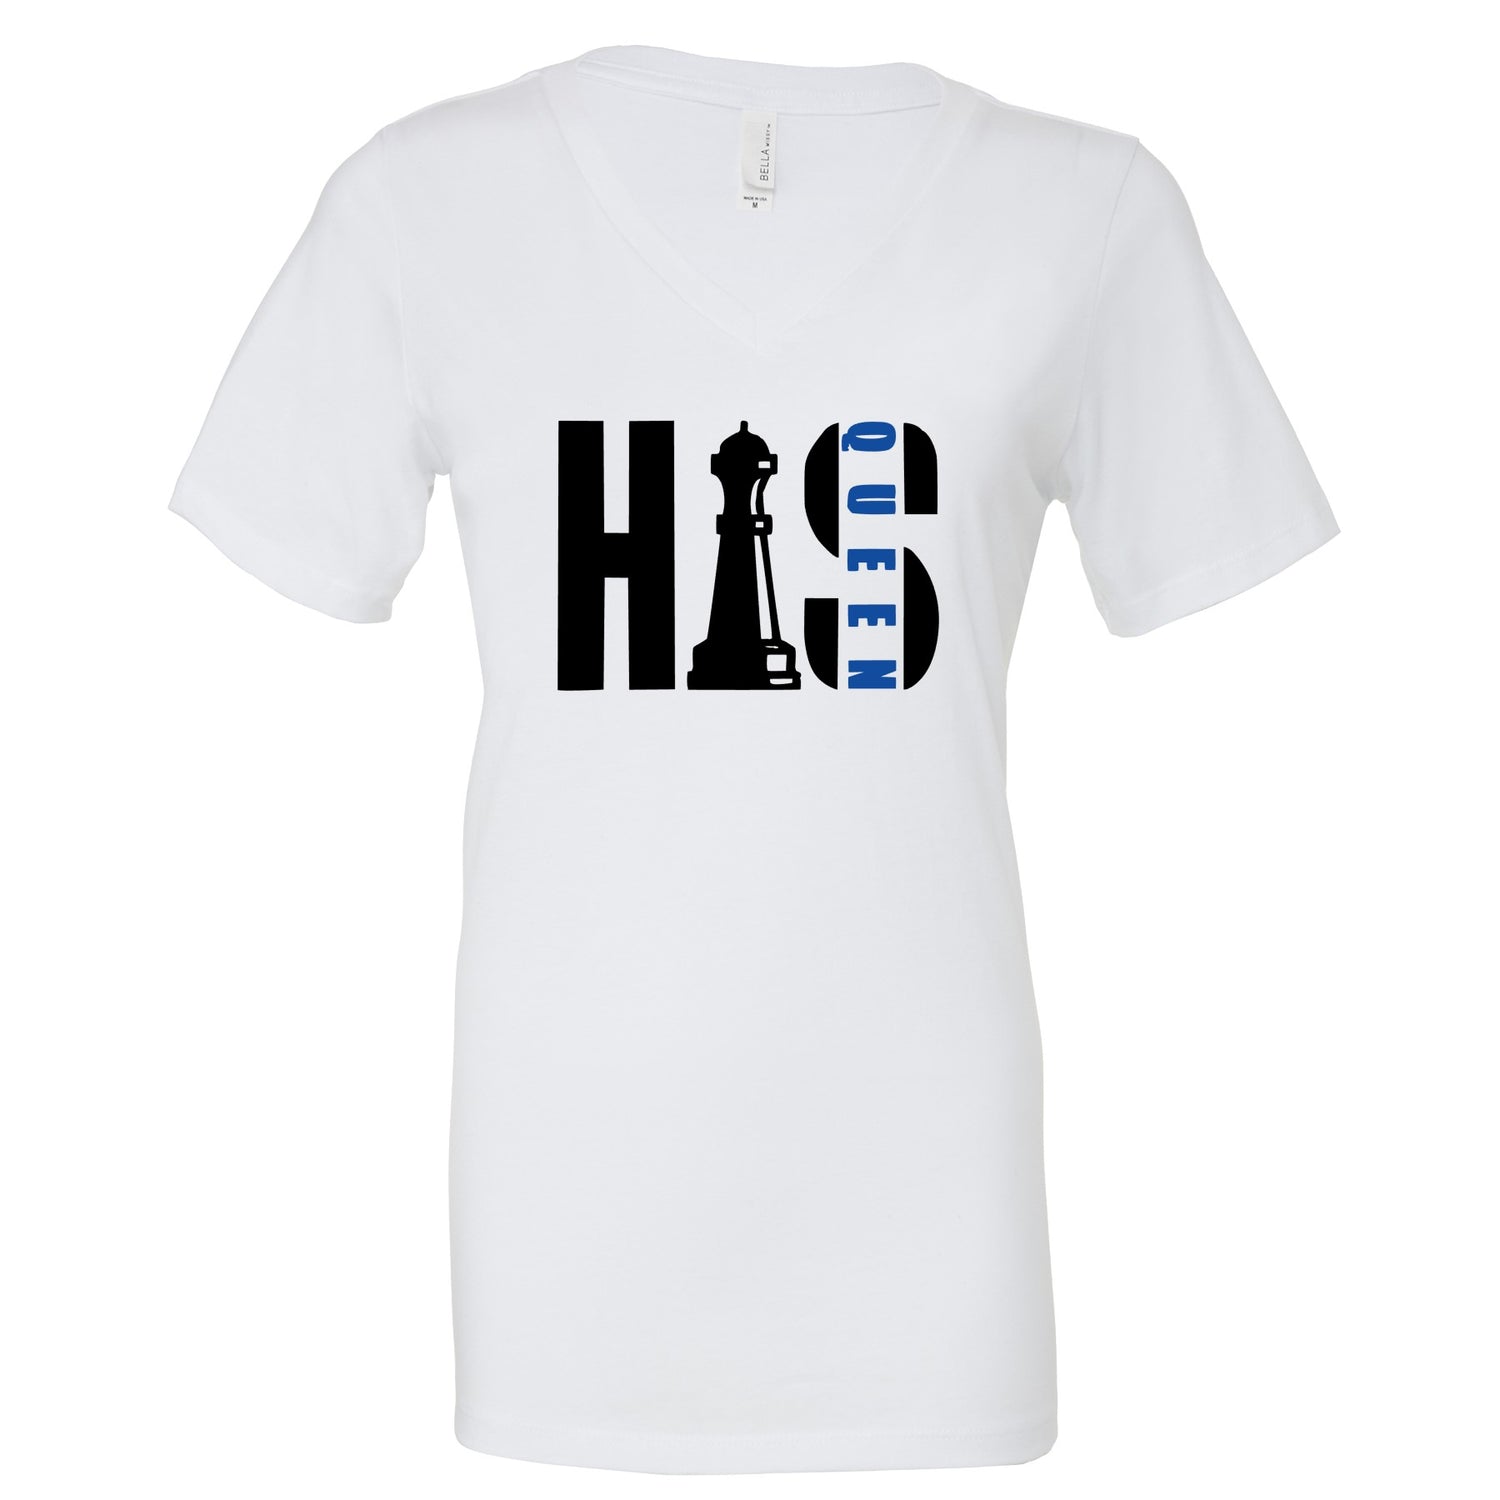 Profyle District - His Queen - T-Shirts - White